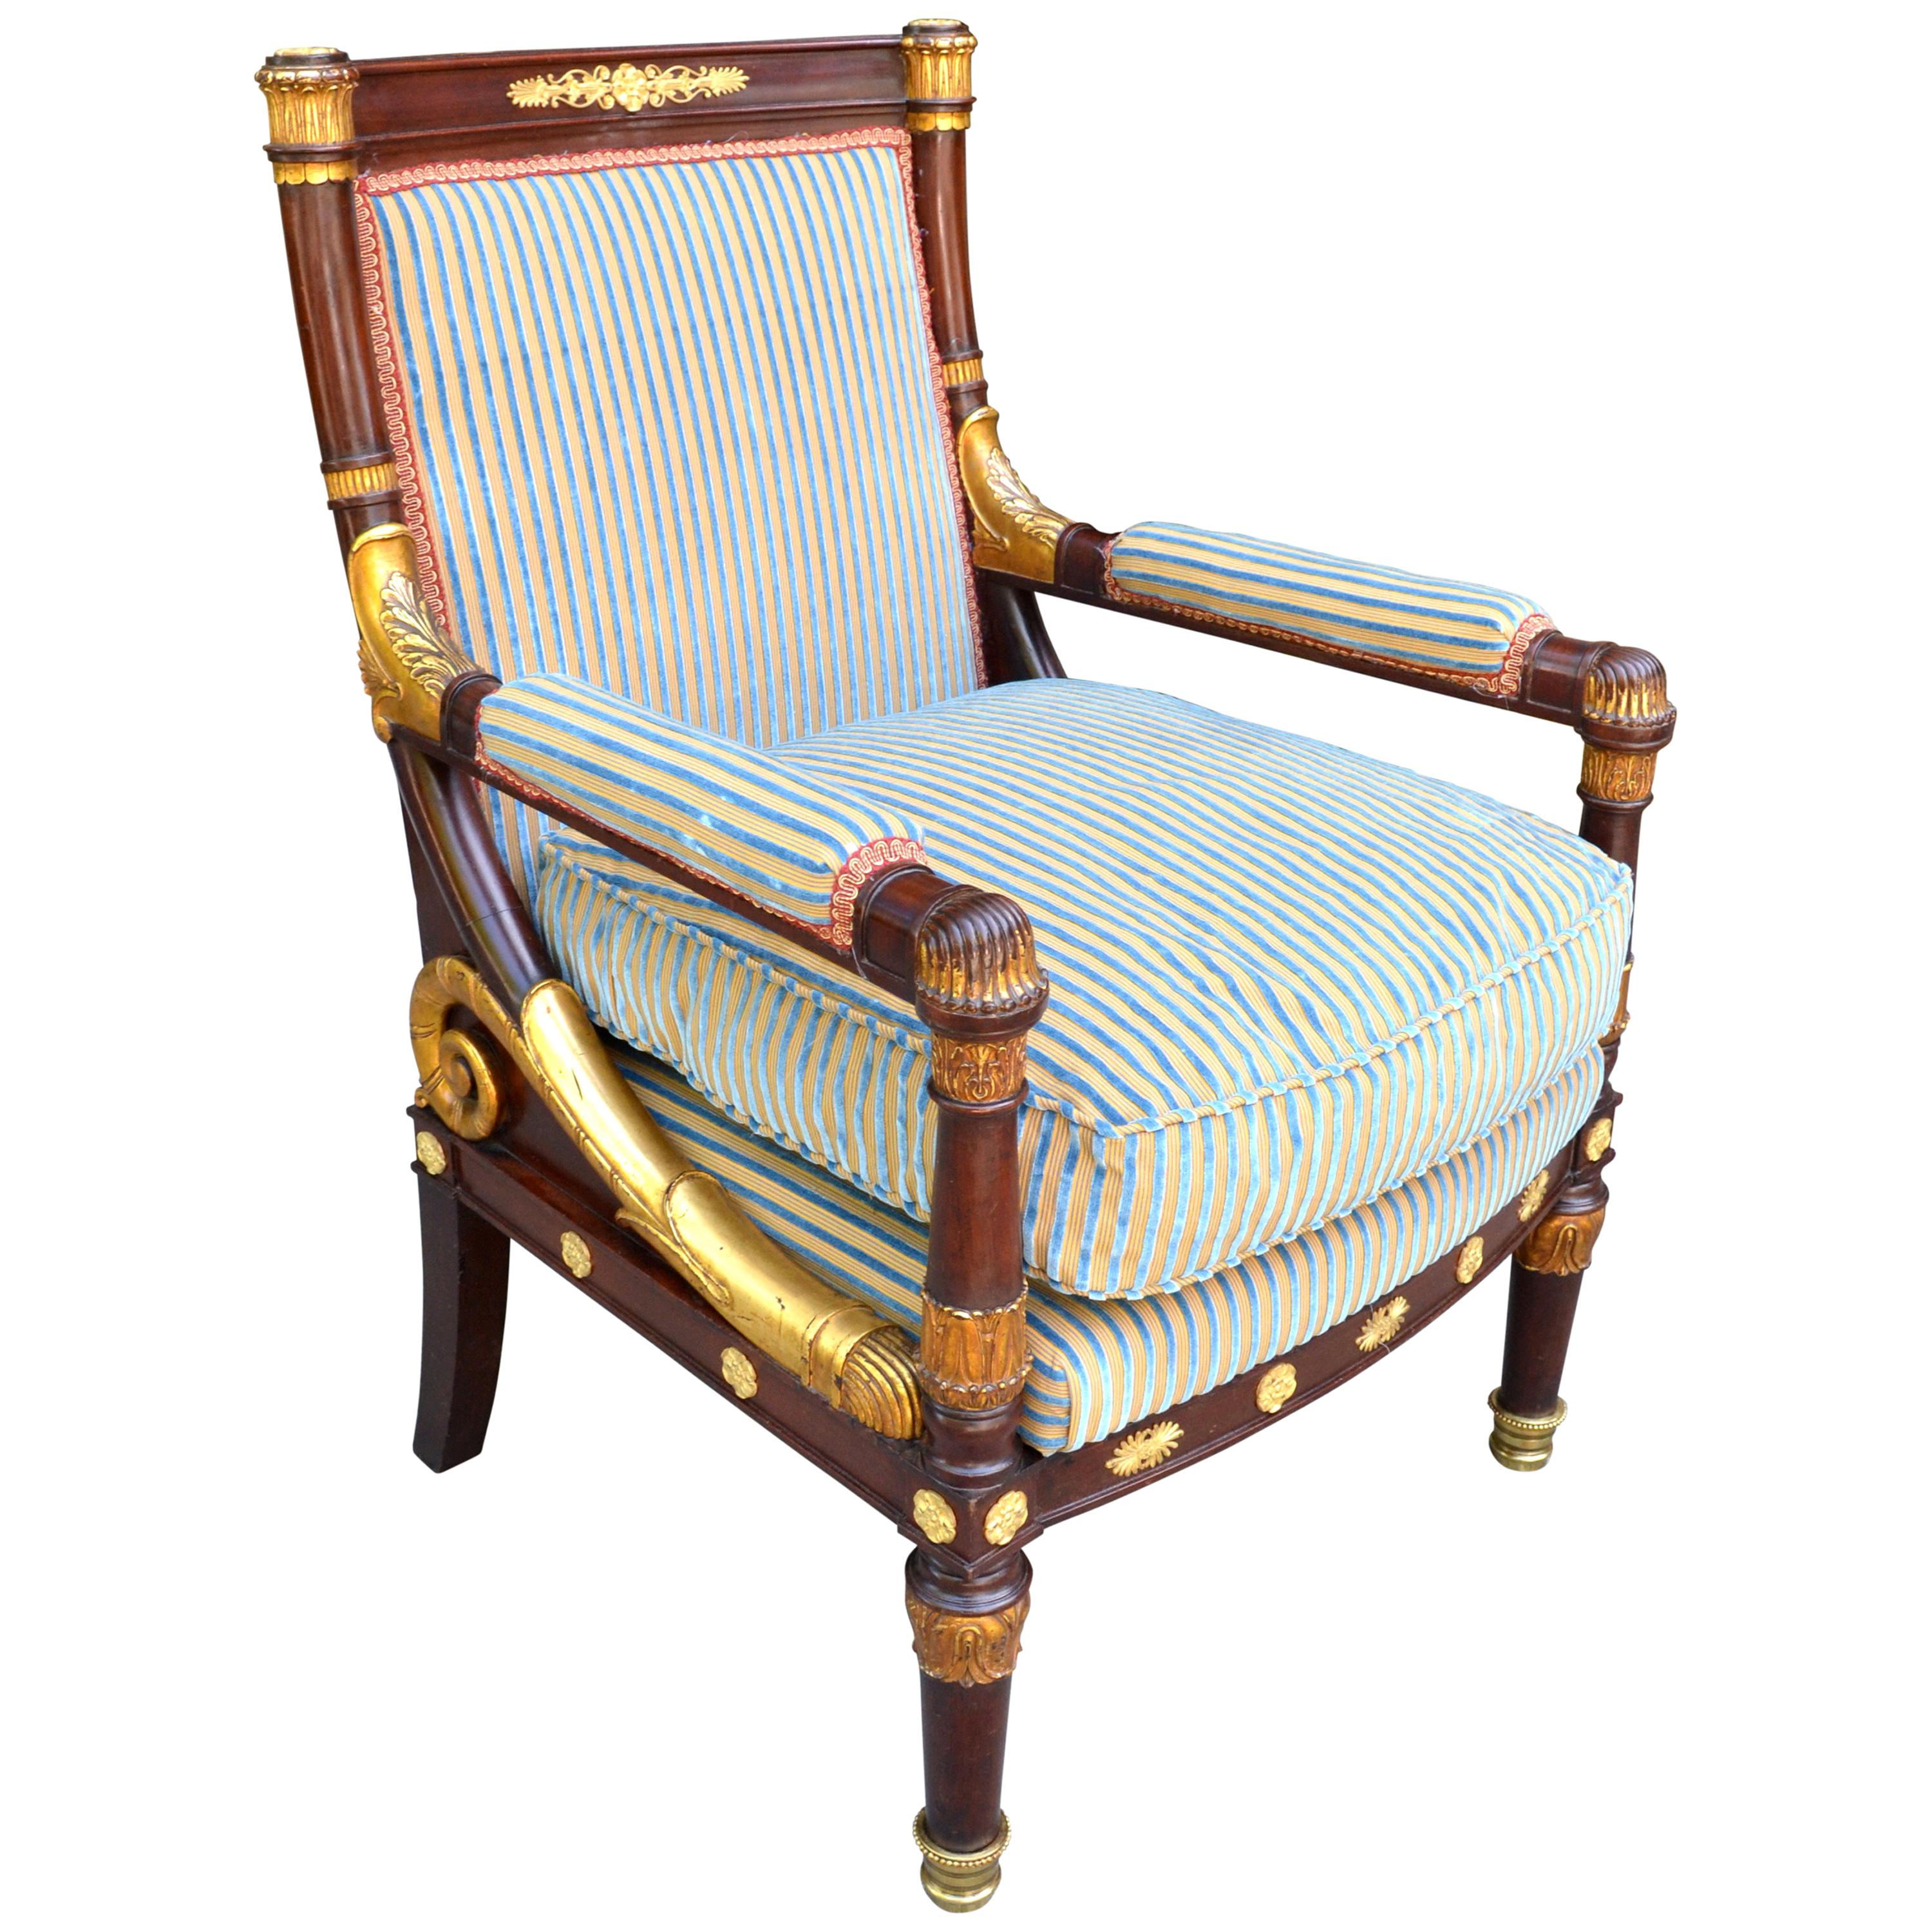 A large scale carved mahogany, gilded wood and gilt bronze mounted open armchairin the early French Empire style. The square back mahogany and giltwood frame joins the arms at the back of the chair in a downward curved gilded wood scroll joining the